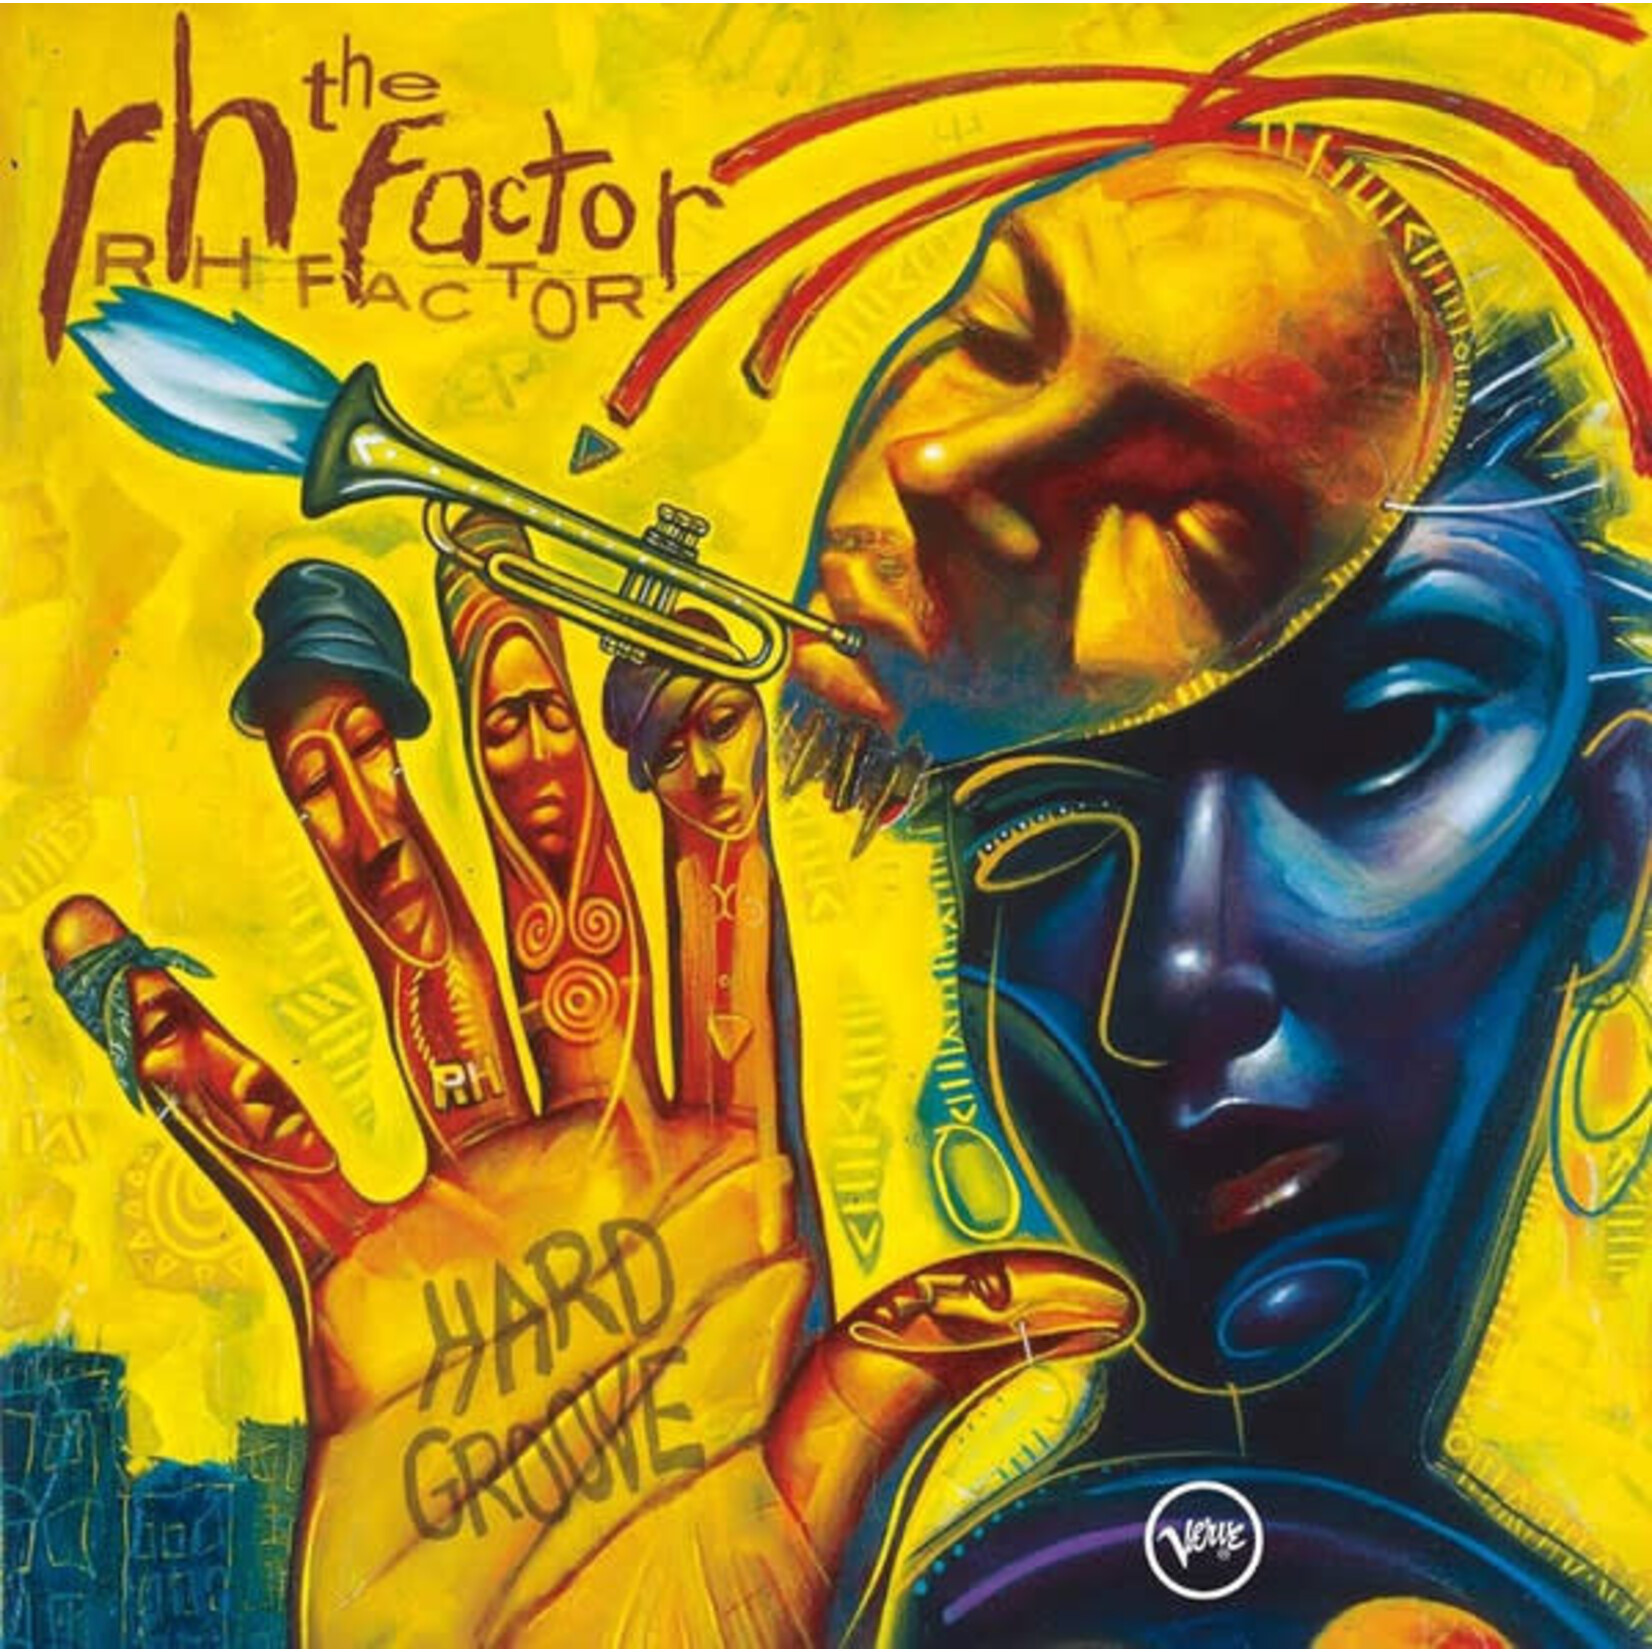 [New] RH Factor (feat Roy Hargrove) - Hard Groove (2LP, Verve By Request Series)